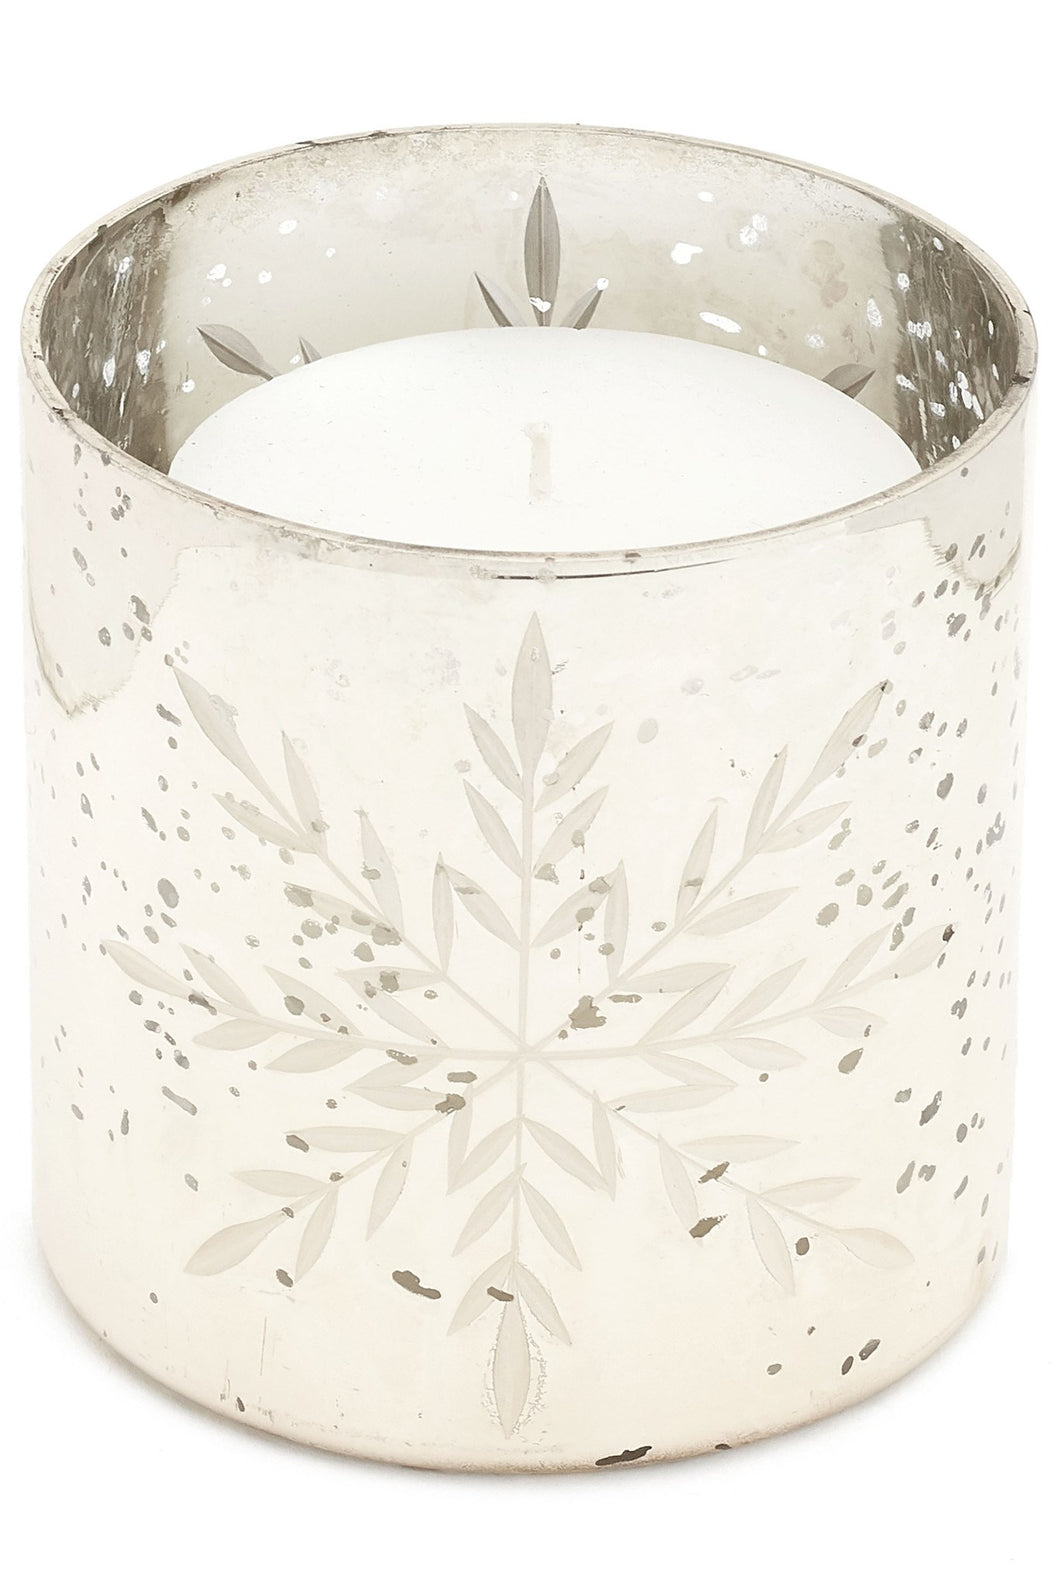 Candle T-Lite Etched Silver Mercury Glass